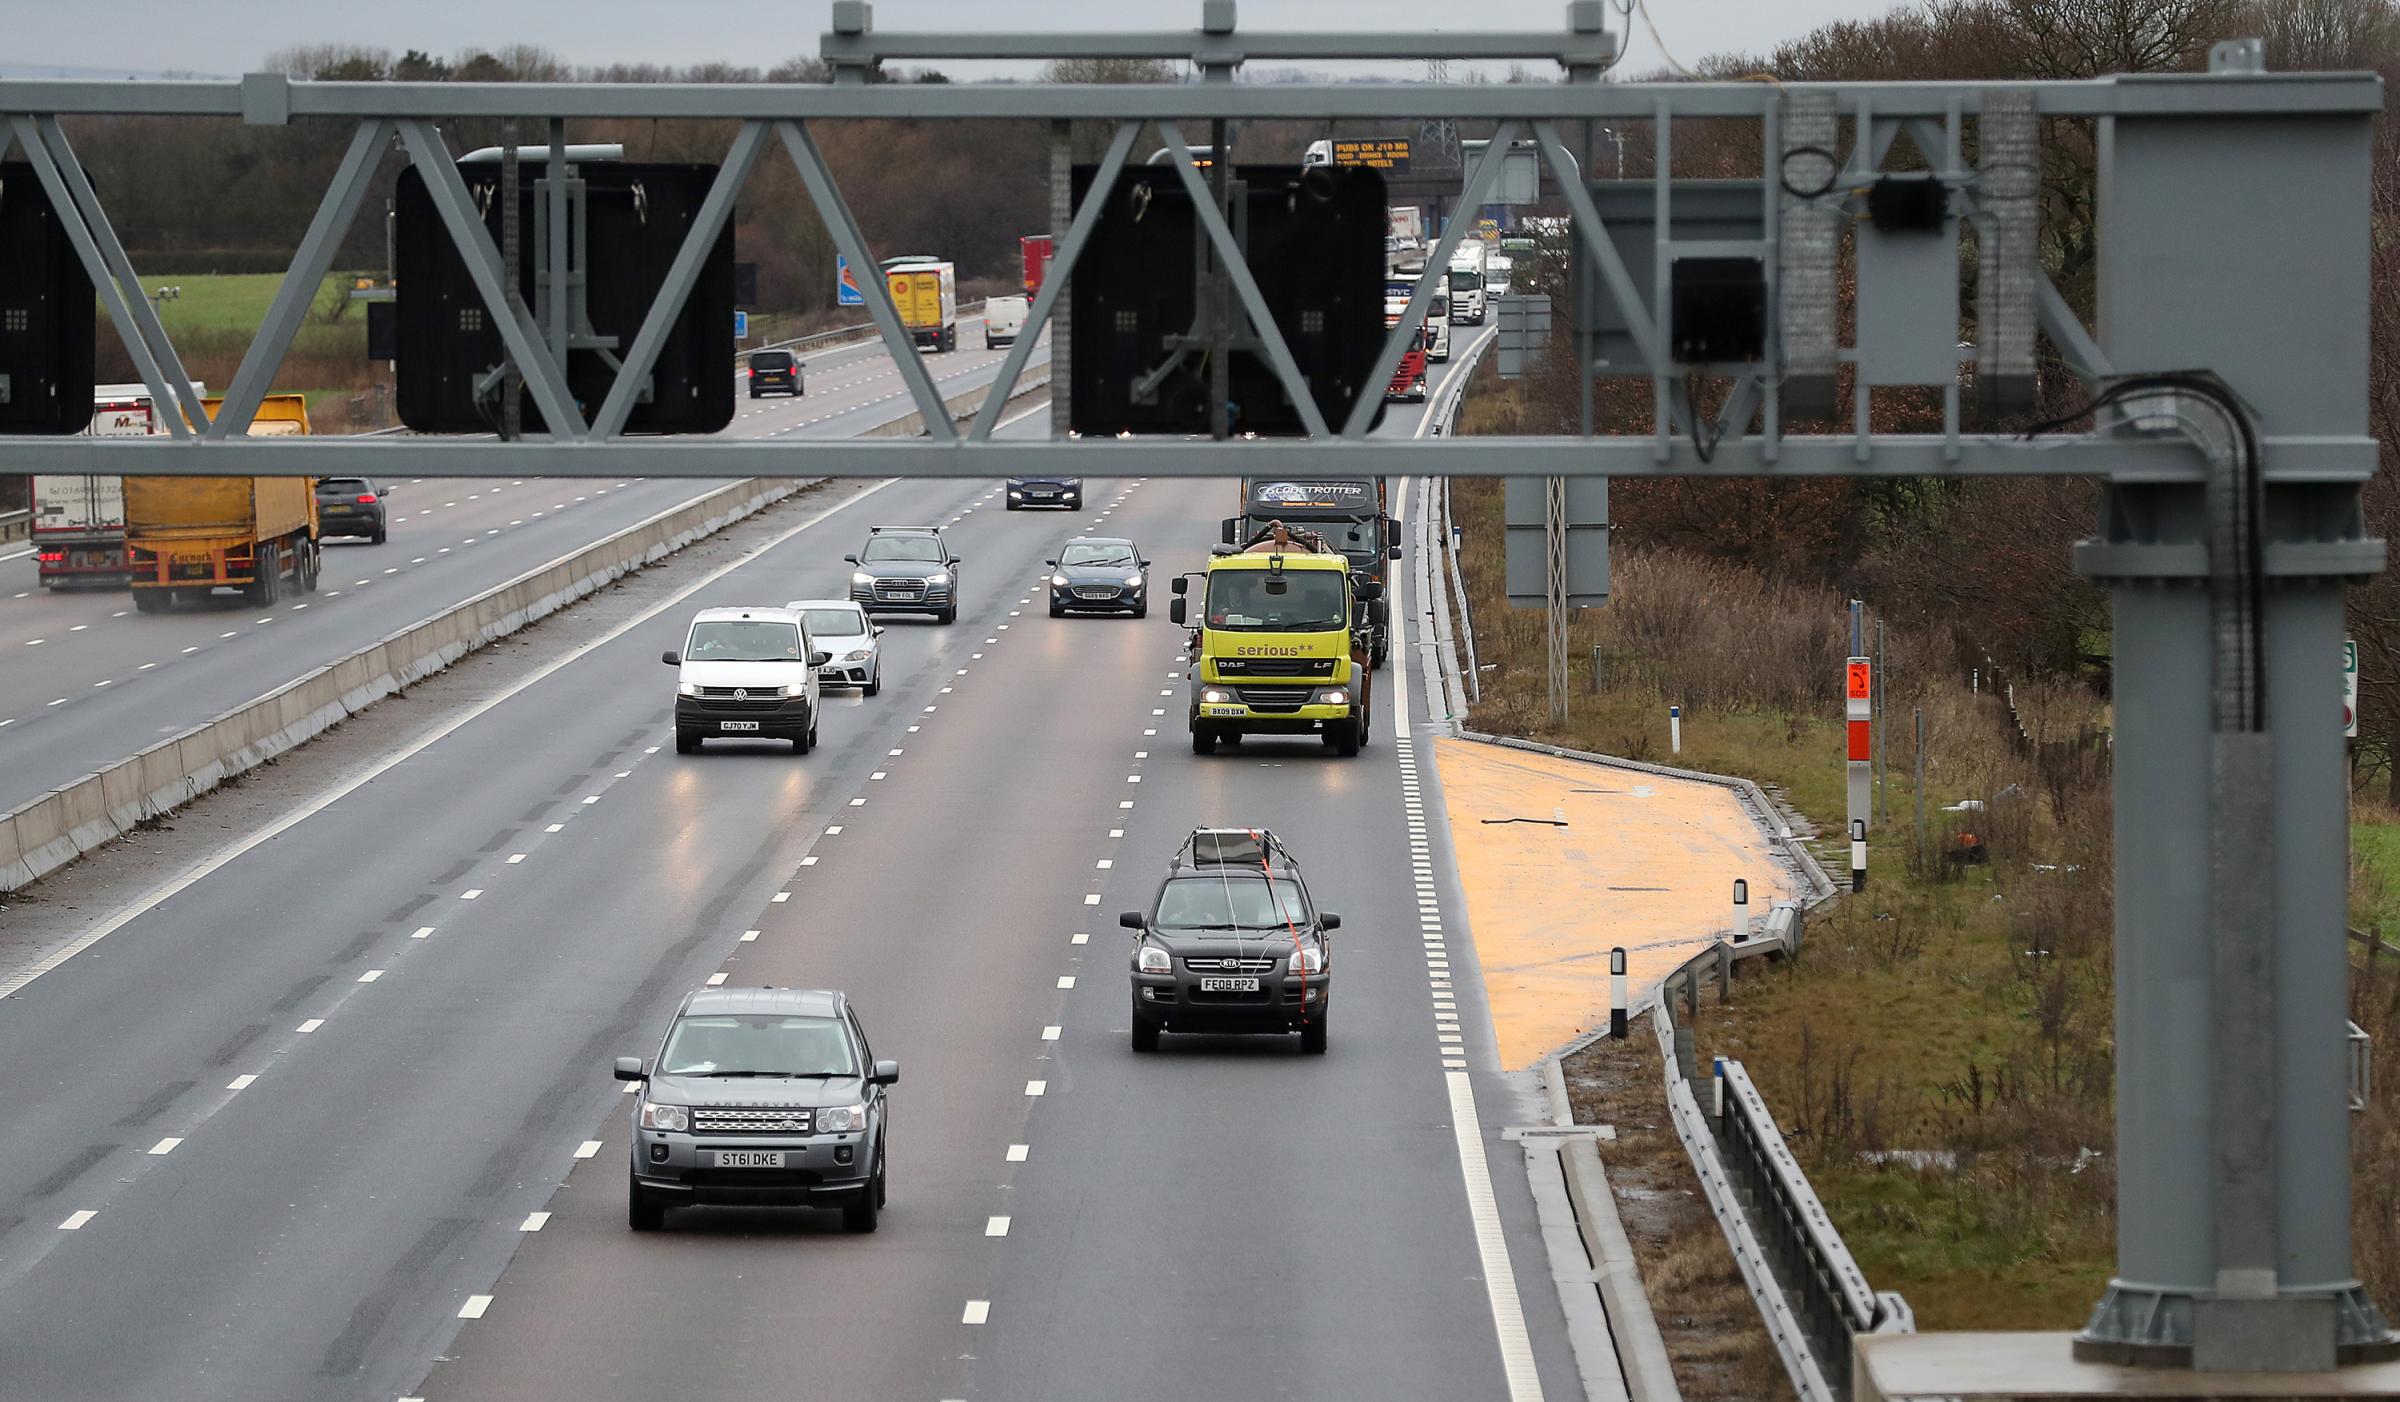 The rollout of so-called smart motorways has been paused (Image: PA)